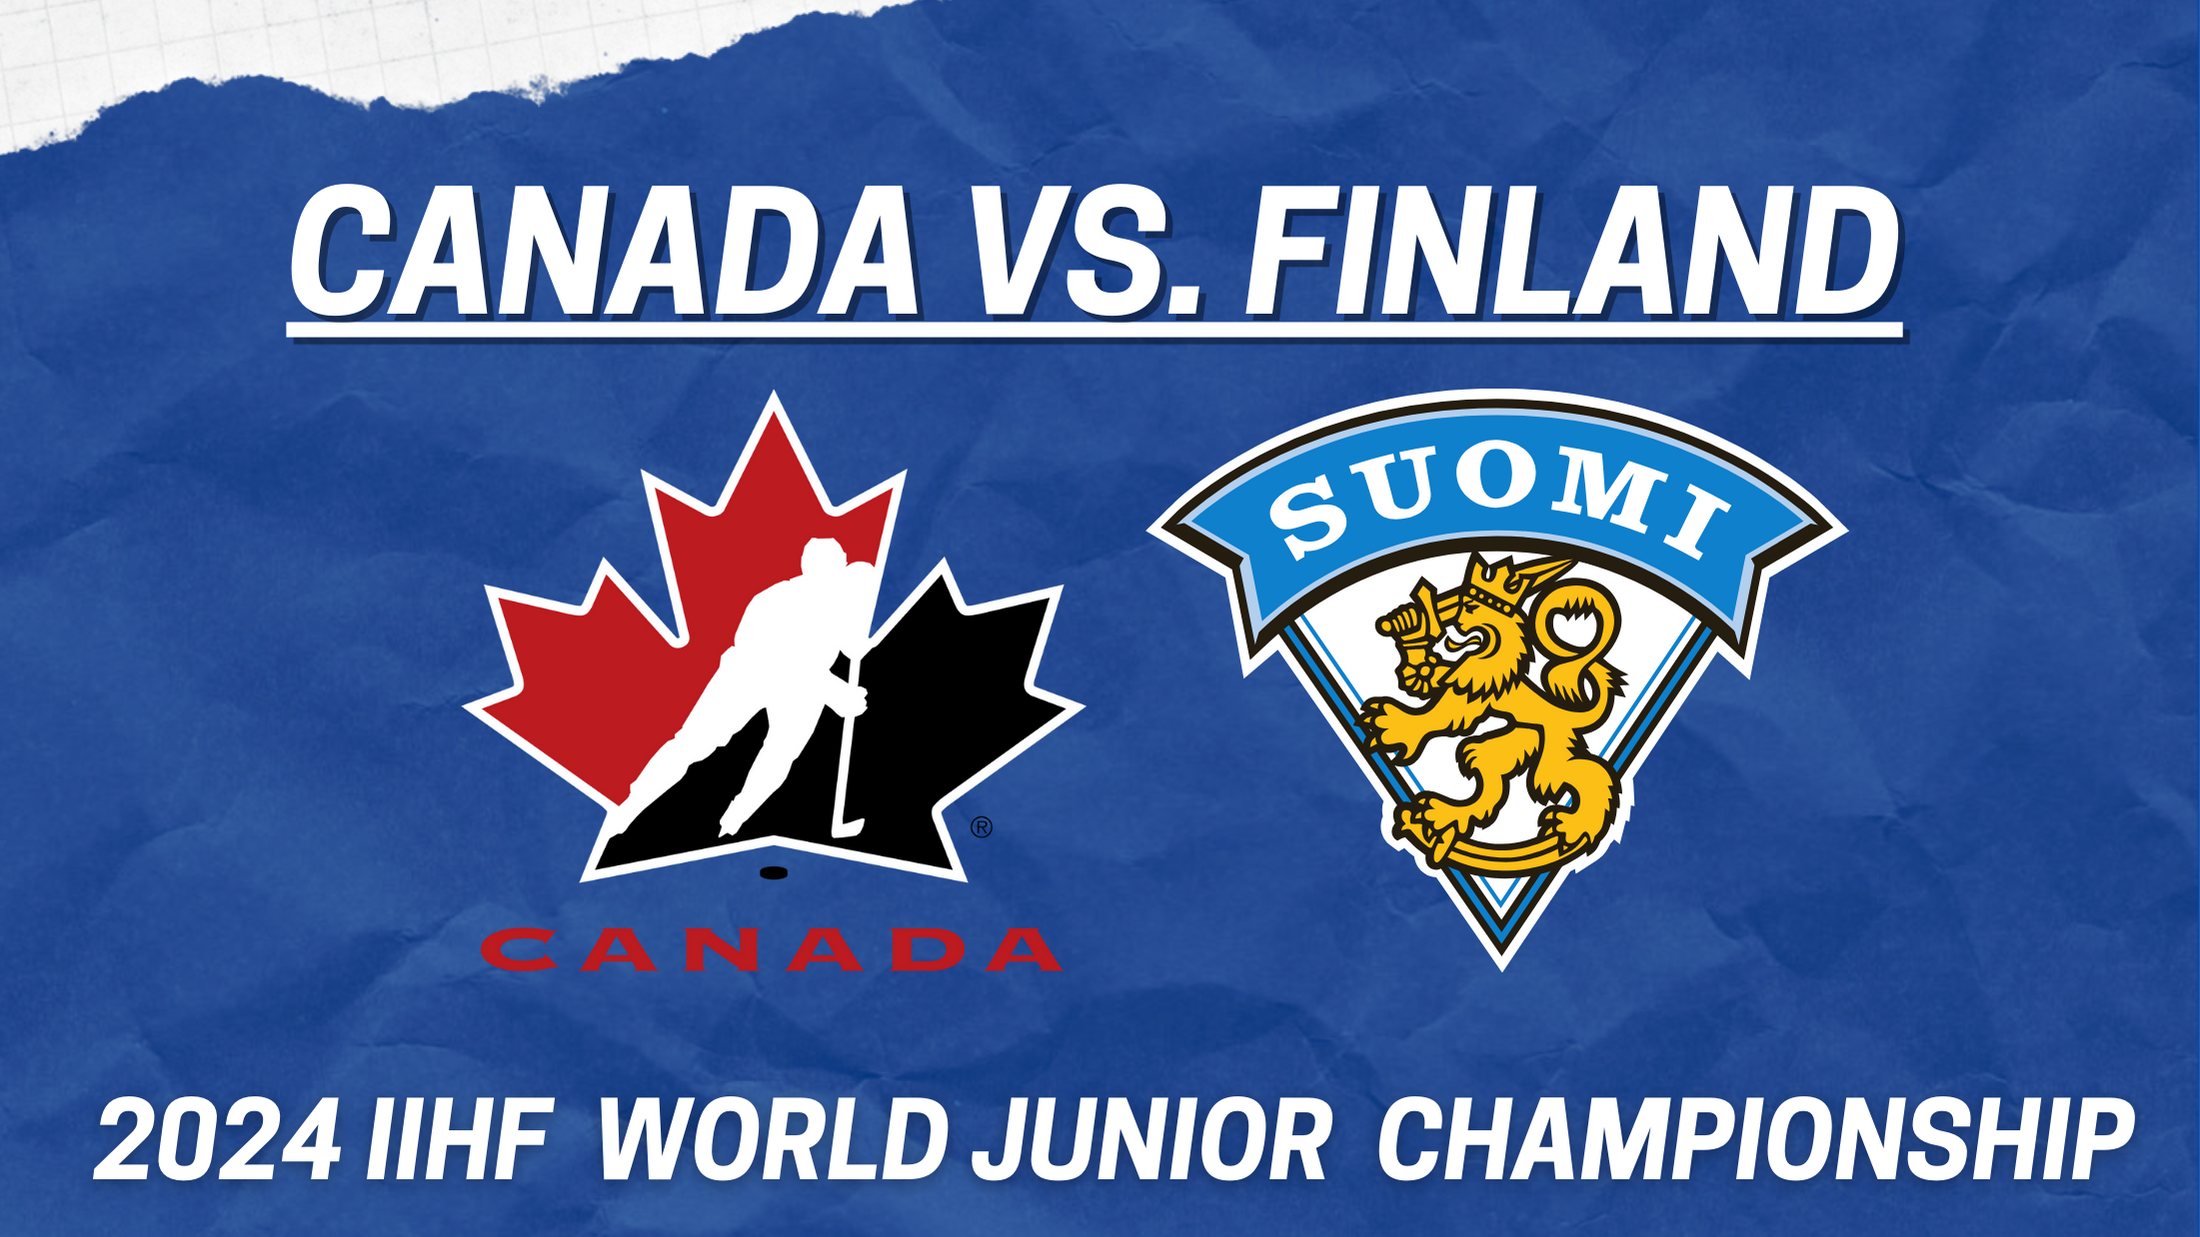 Top standouts from Canada vs. Finland game at 2024 World Junior Championship